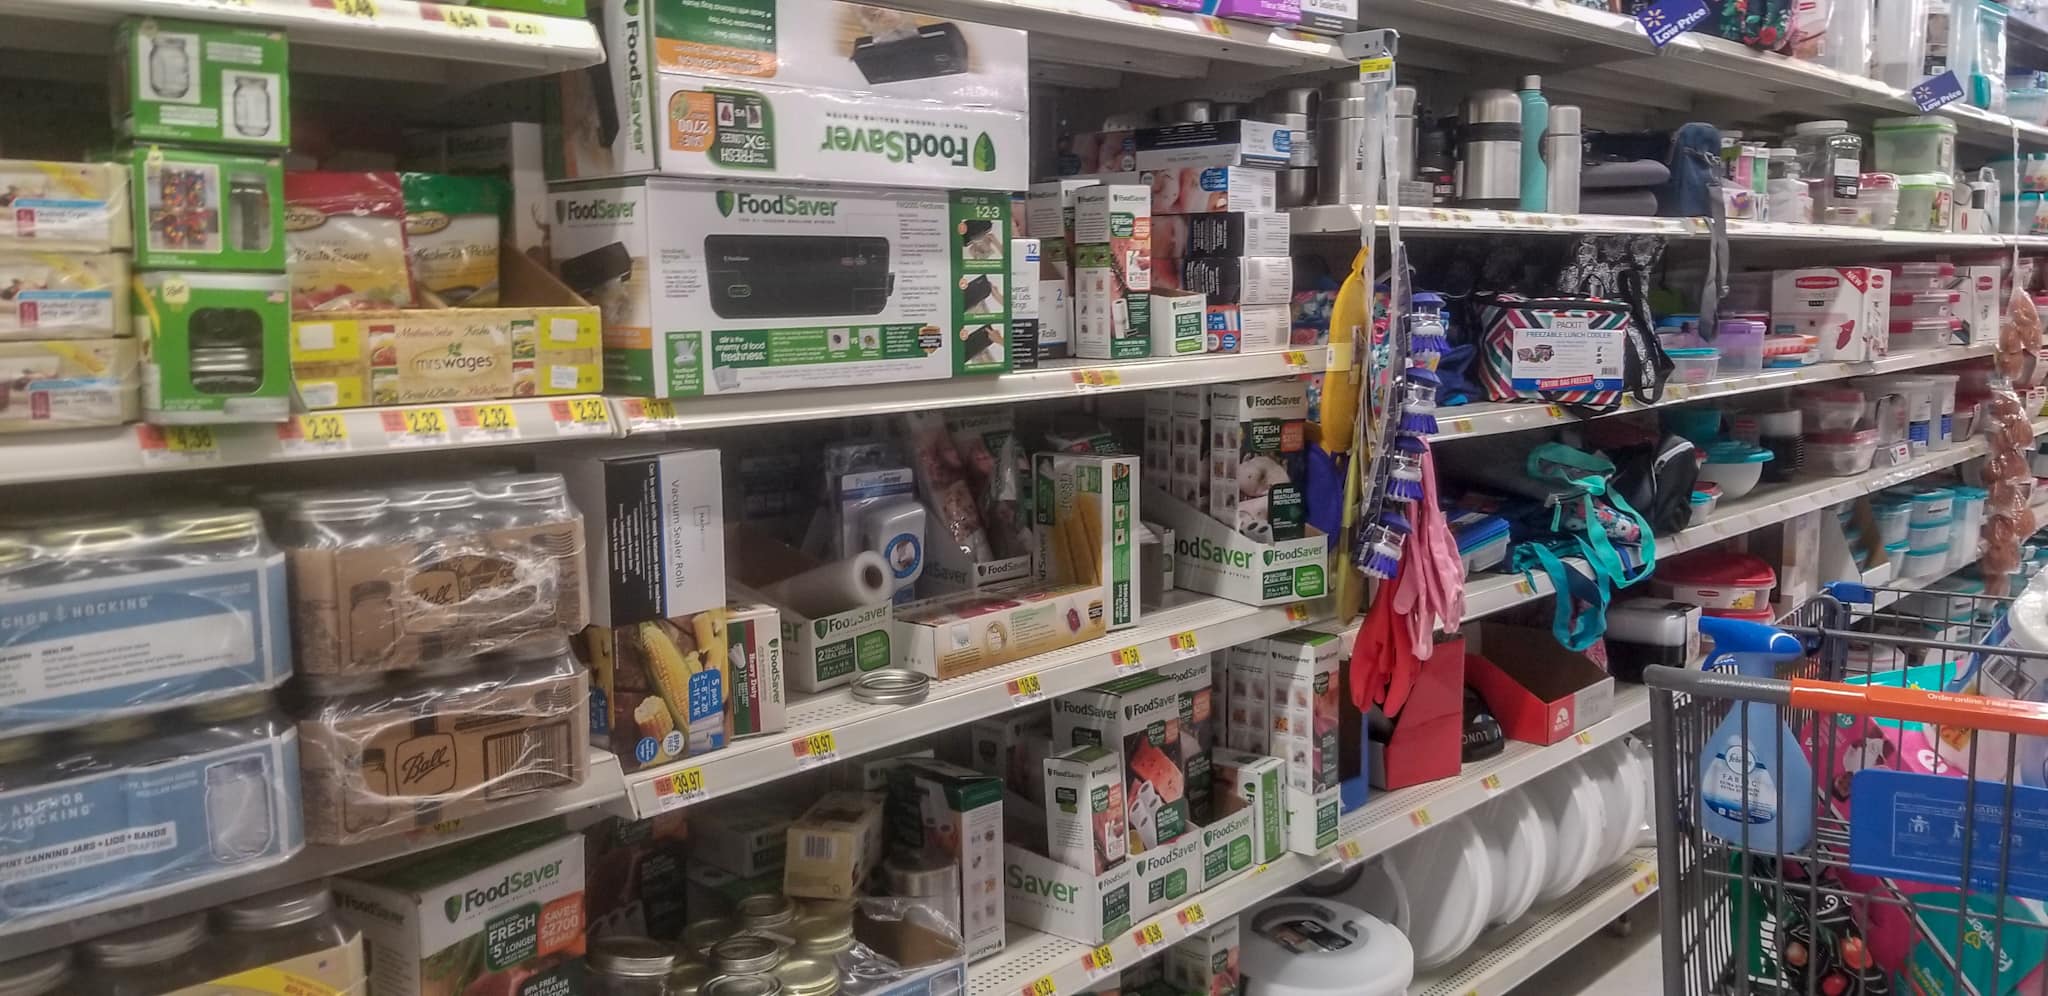 Walmart shelves filled with FoodSaver products.